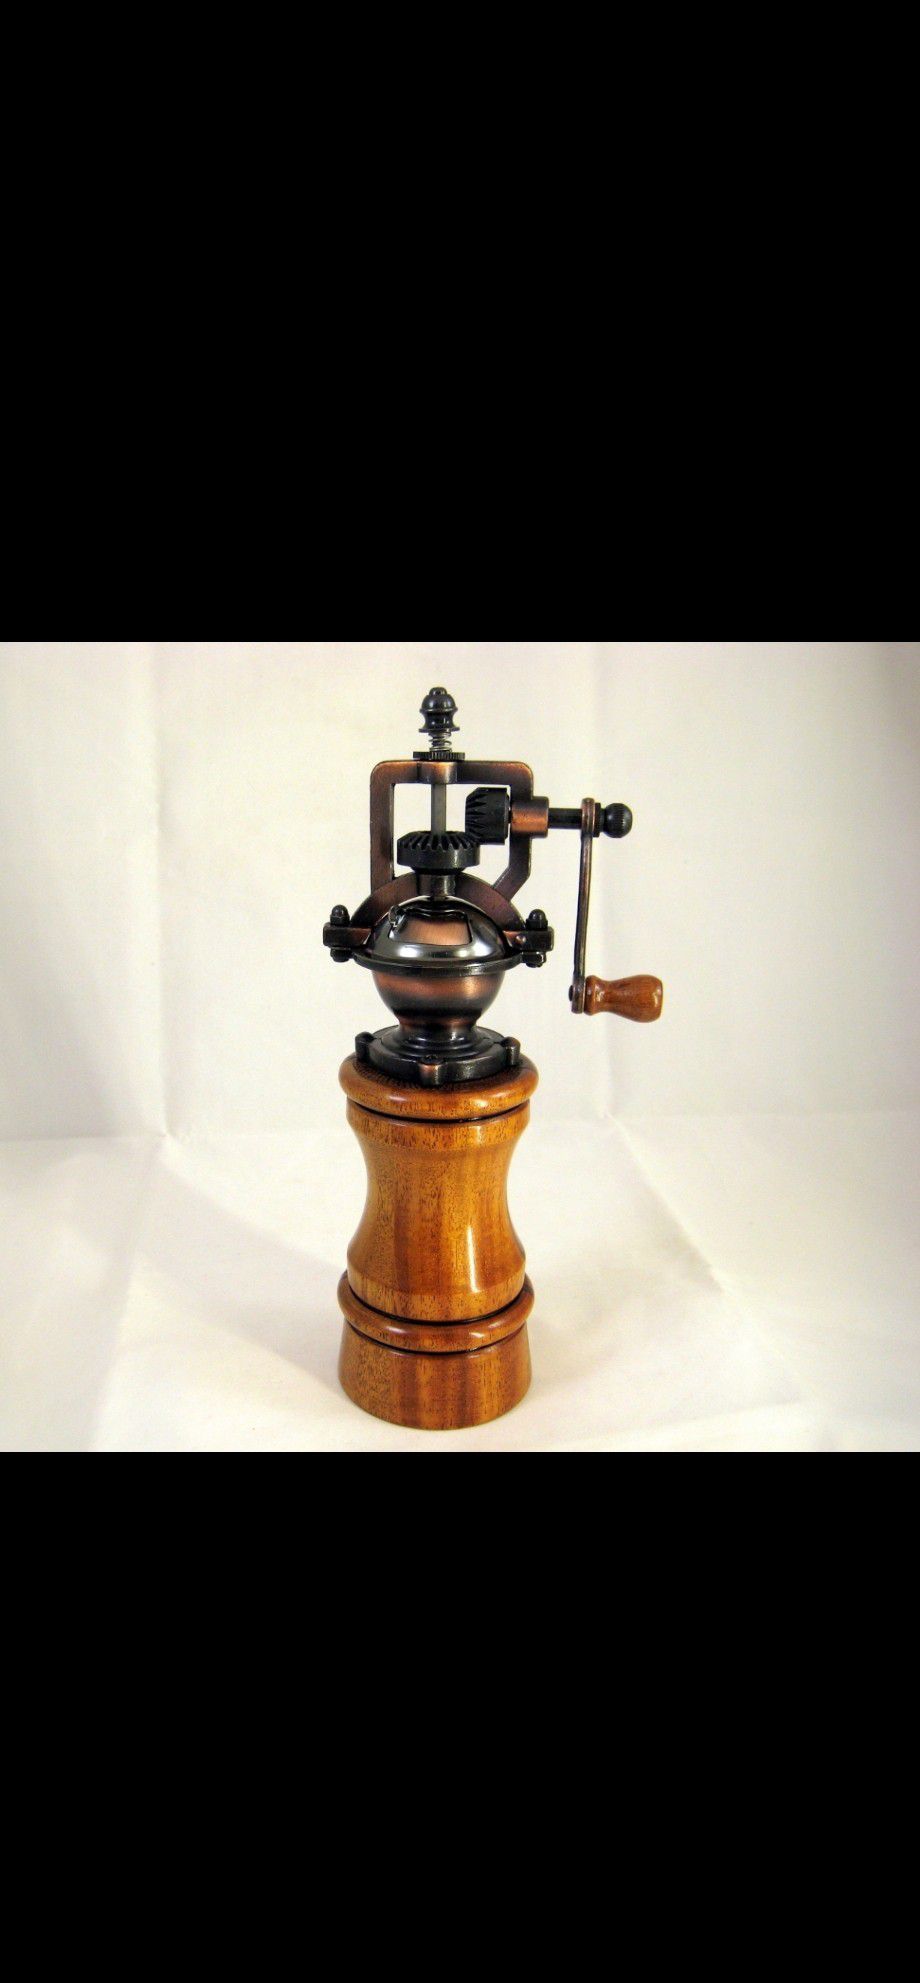 Antique style Pepper mills